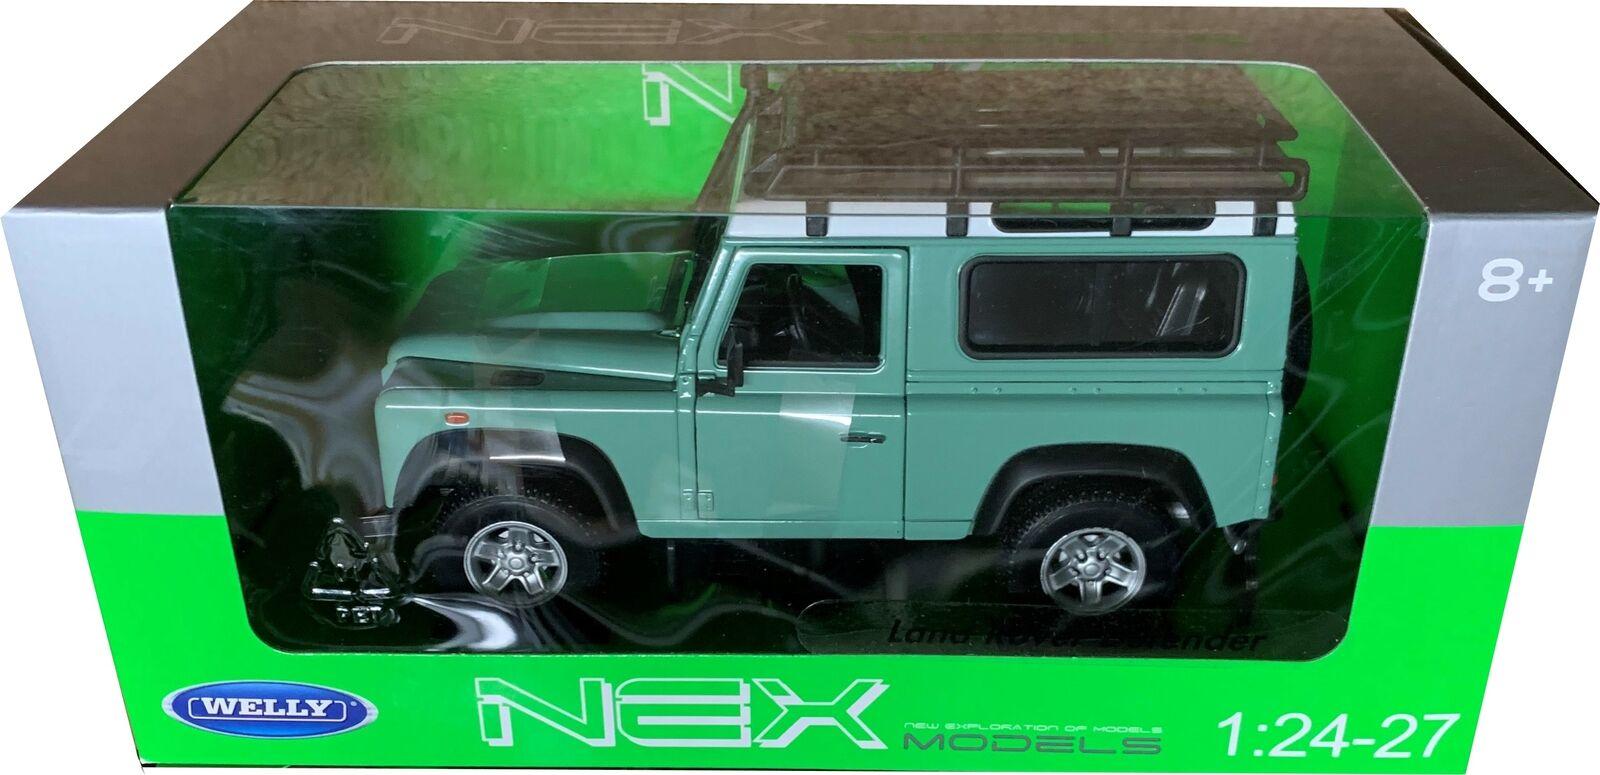 Land Rover Defender in light green with roof rack & snorkel 1:24-27 Welly model